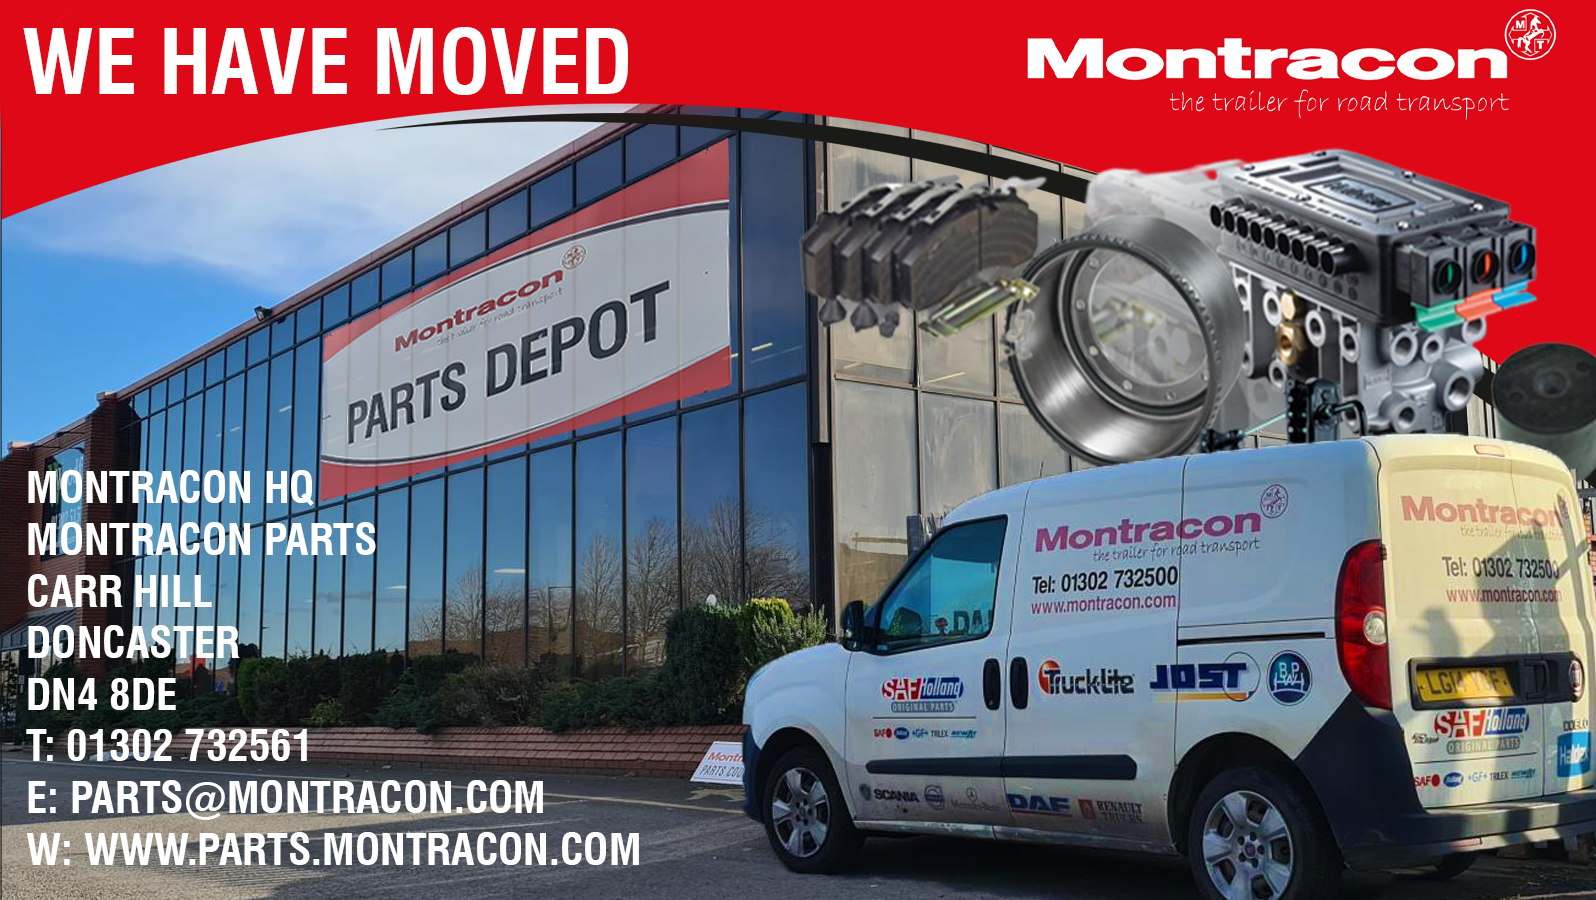 Montracon Parts Have Moved